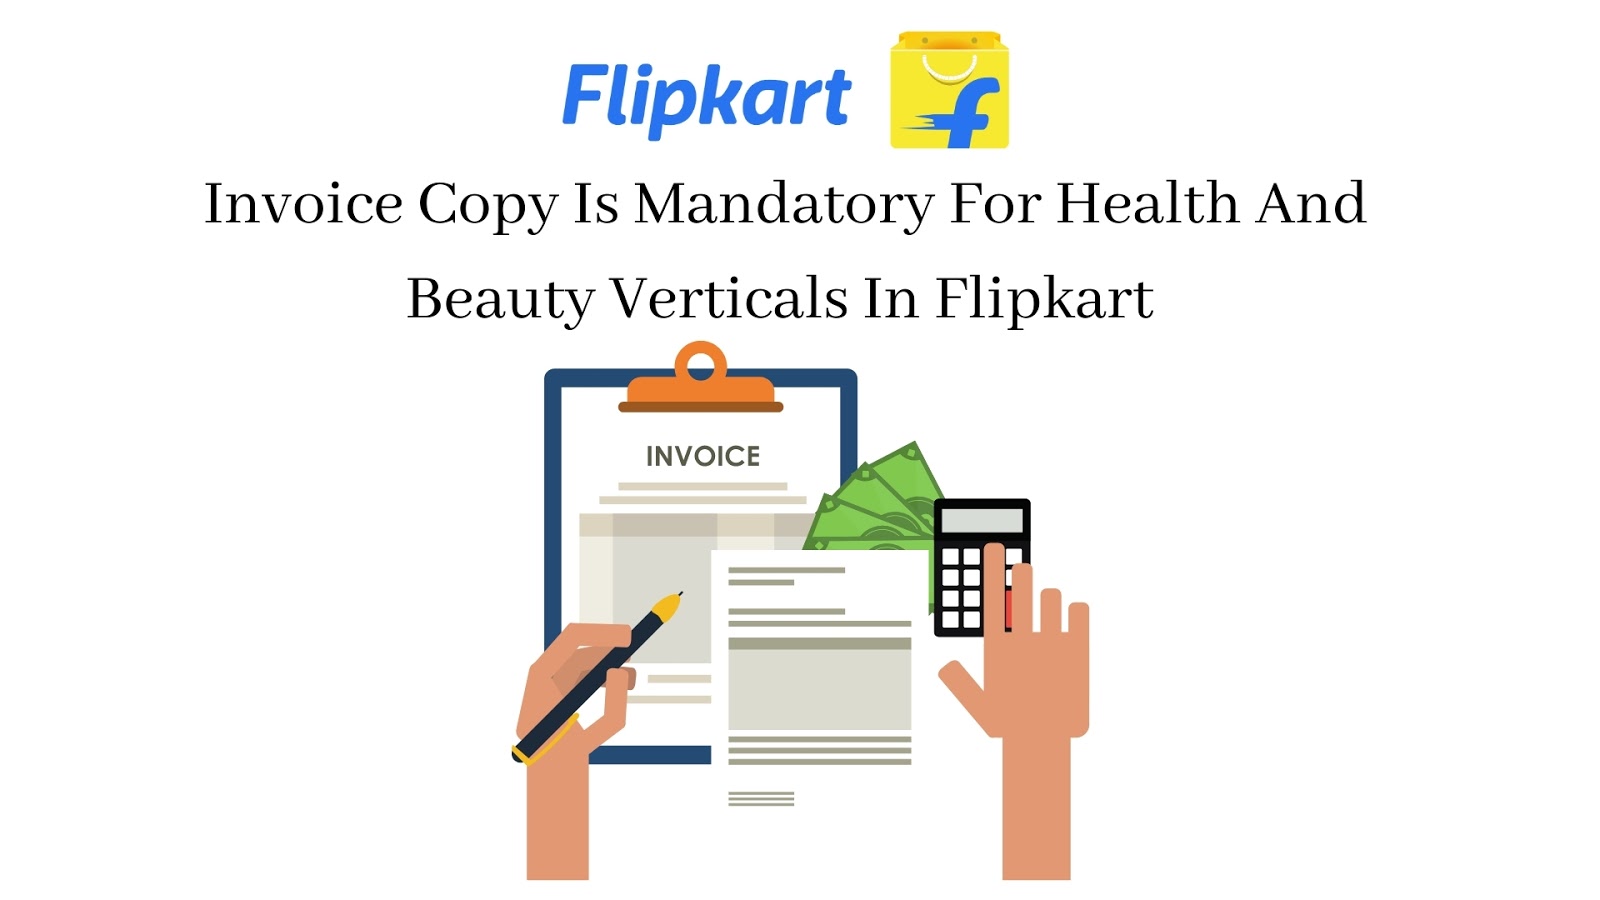 Invoice Copy Is Mandatory For Health And Beauty Verticals In Flipkart, Invoice is mandatory for e-coomerce, Amazon,Flipkart,gst,ecommerce sector,e-invoice government finances,trade finance,banking finance,Amazon,Flipkart,gst,ecommerce sector,e-invoice GST News and Announcement,Blog Post,GST,Goods and Services Tax